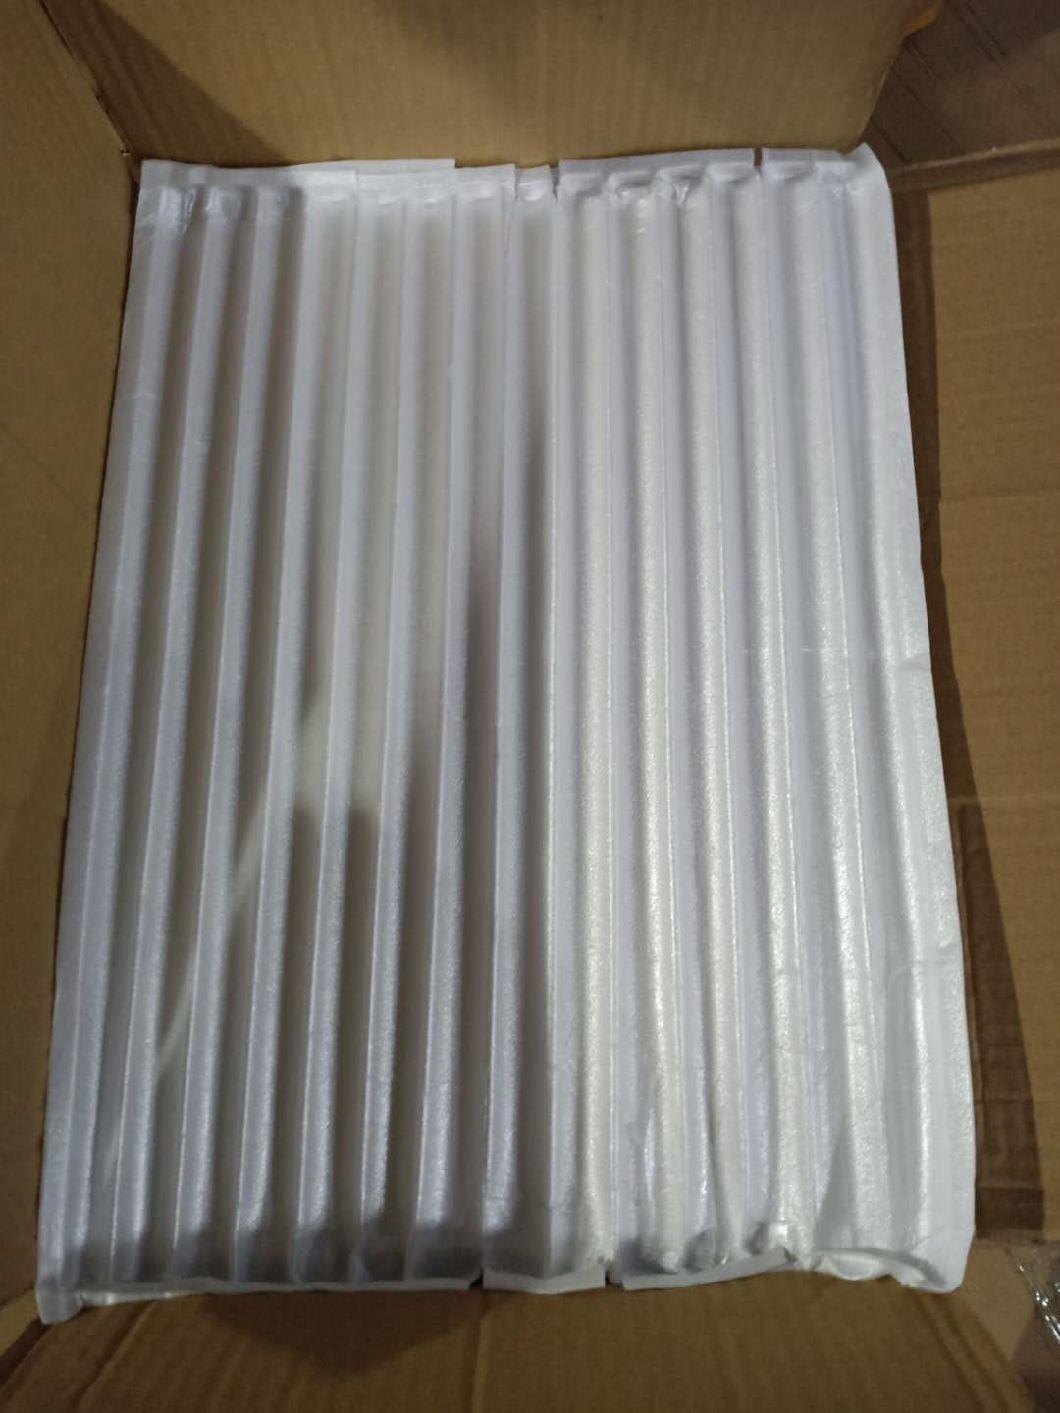 Empty Square Tubes Plastic White 7ml Lip Gloss Tube with Brush for Cosmetic Packaging Containers Wholesale